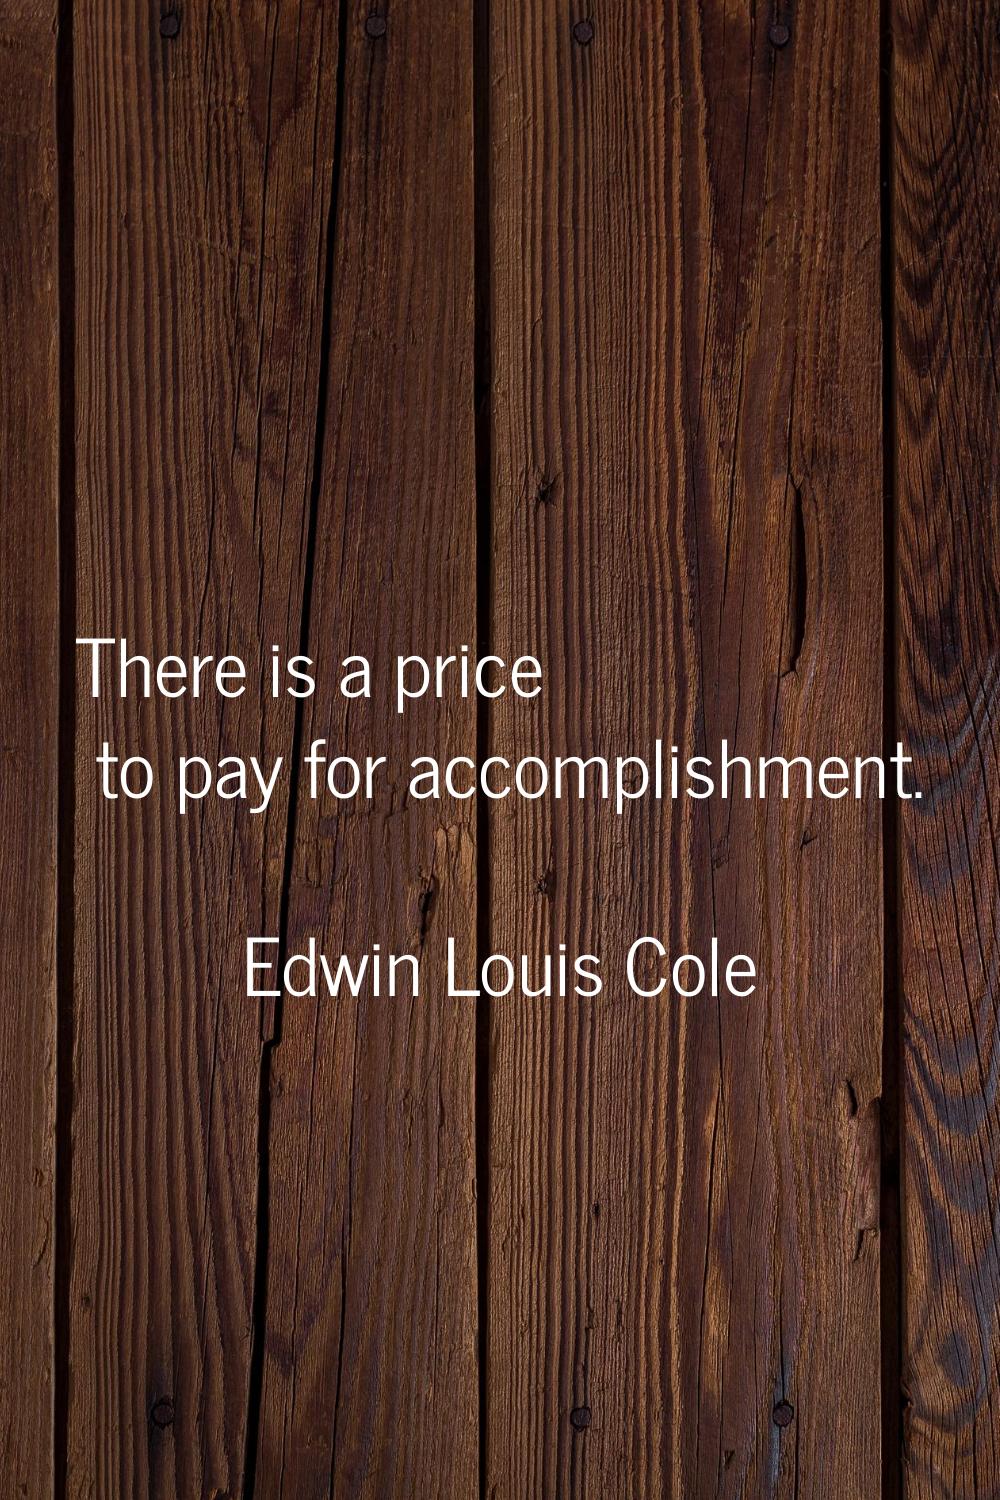 There is a price to pay for accomplishment.